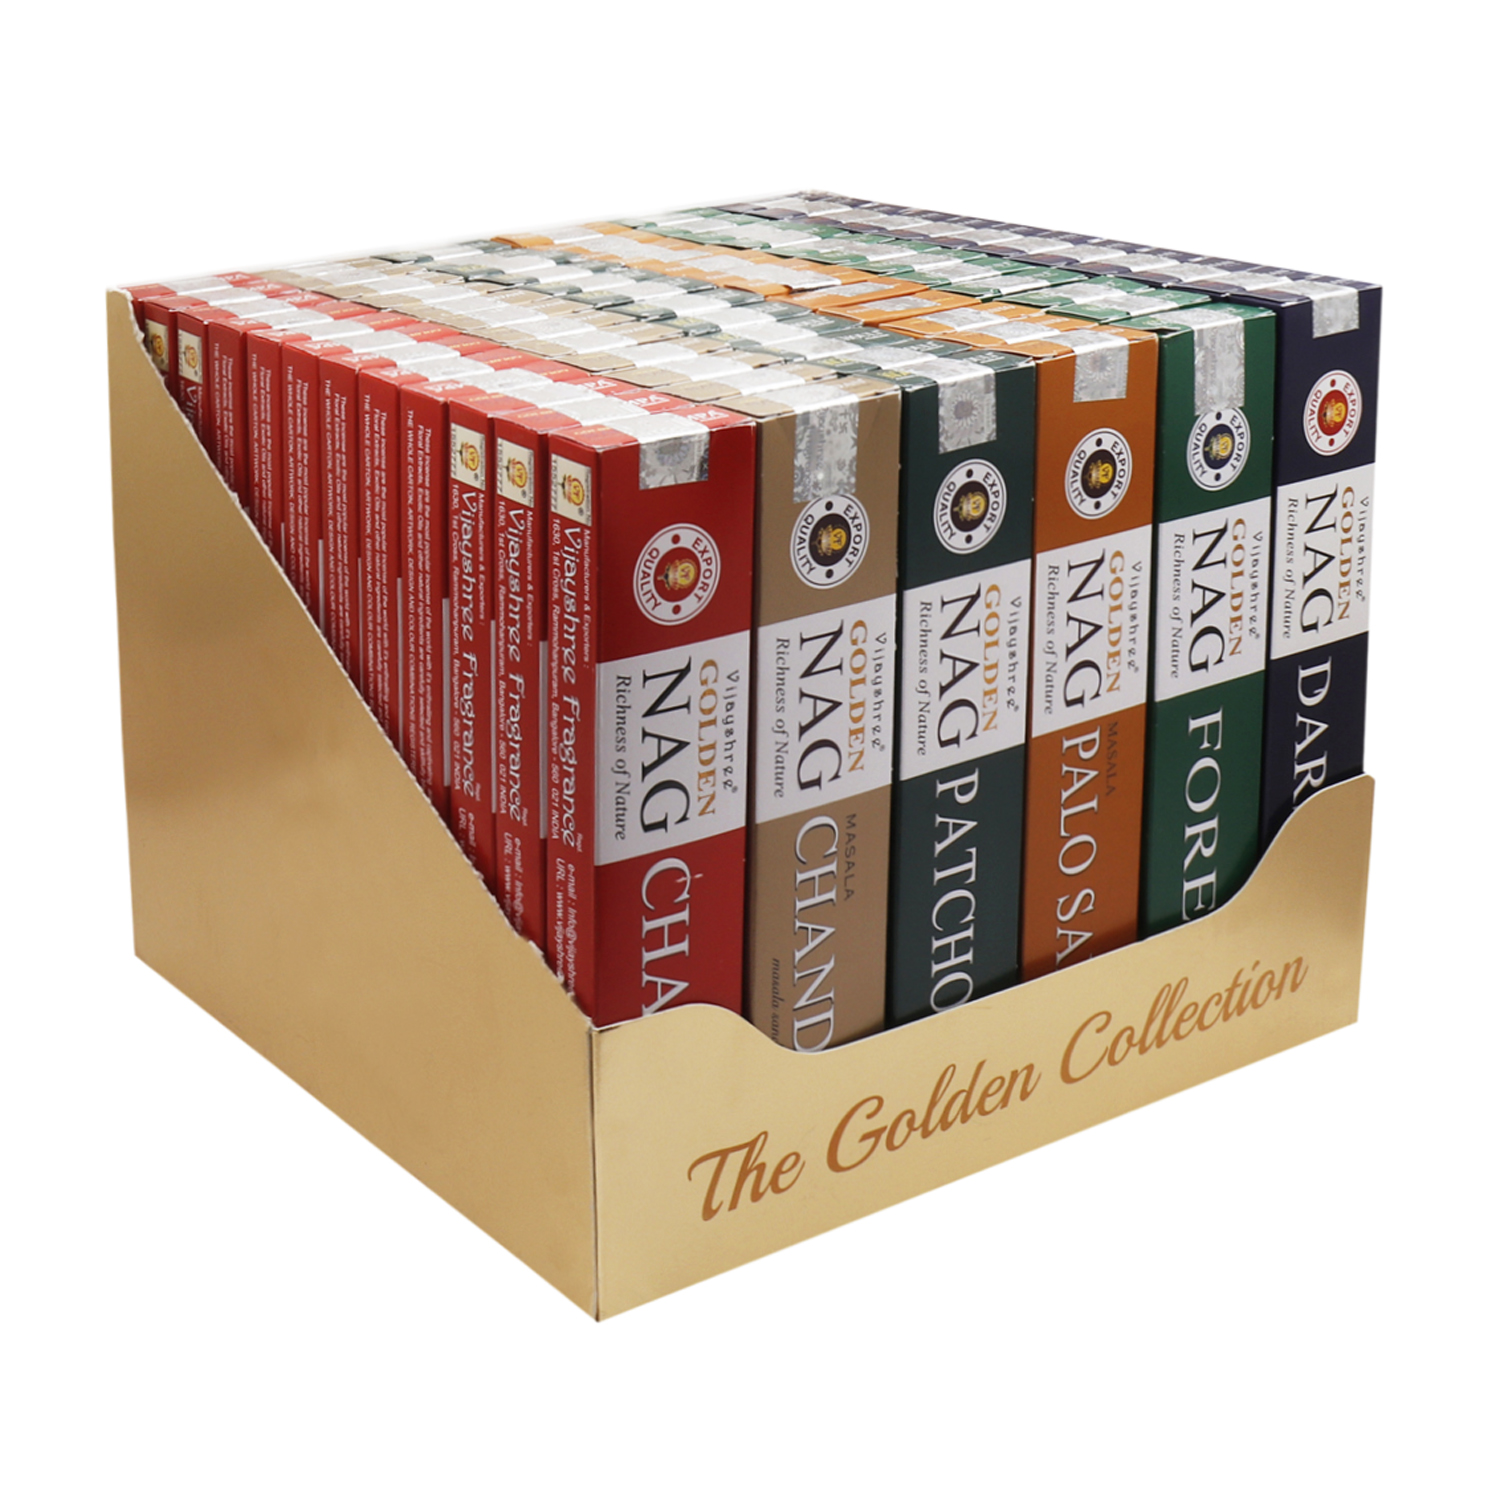 72 x 15g Golden Collection Box - 6 Assorted Fragrances